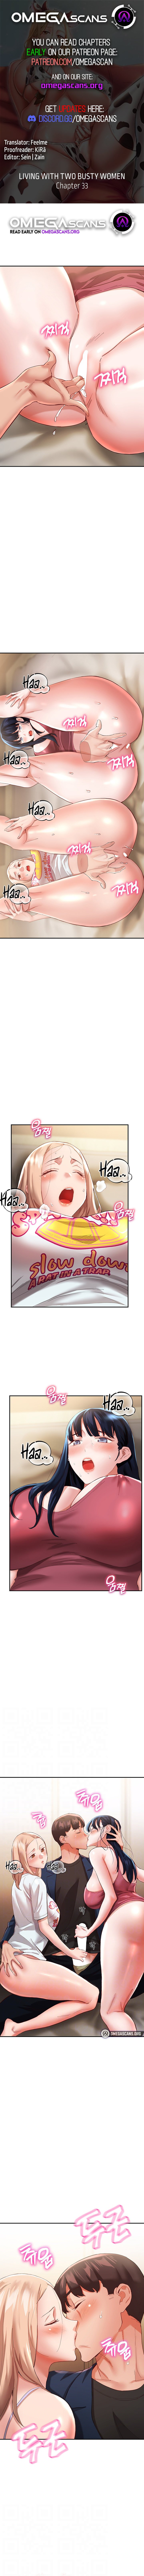 living-with-two-busty-women-chap-33-0